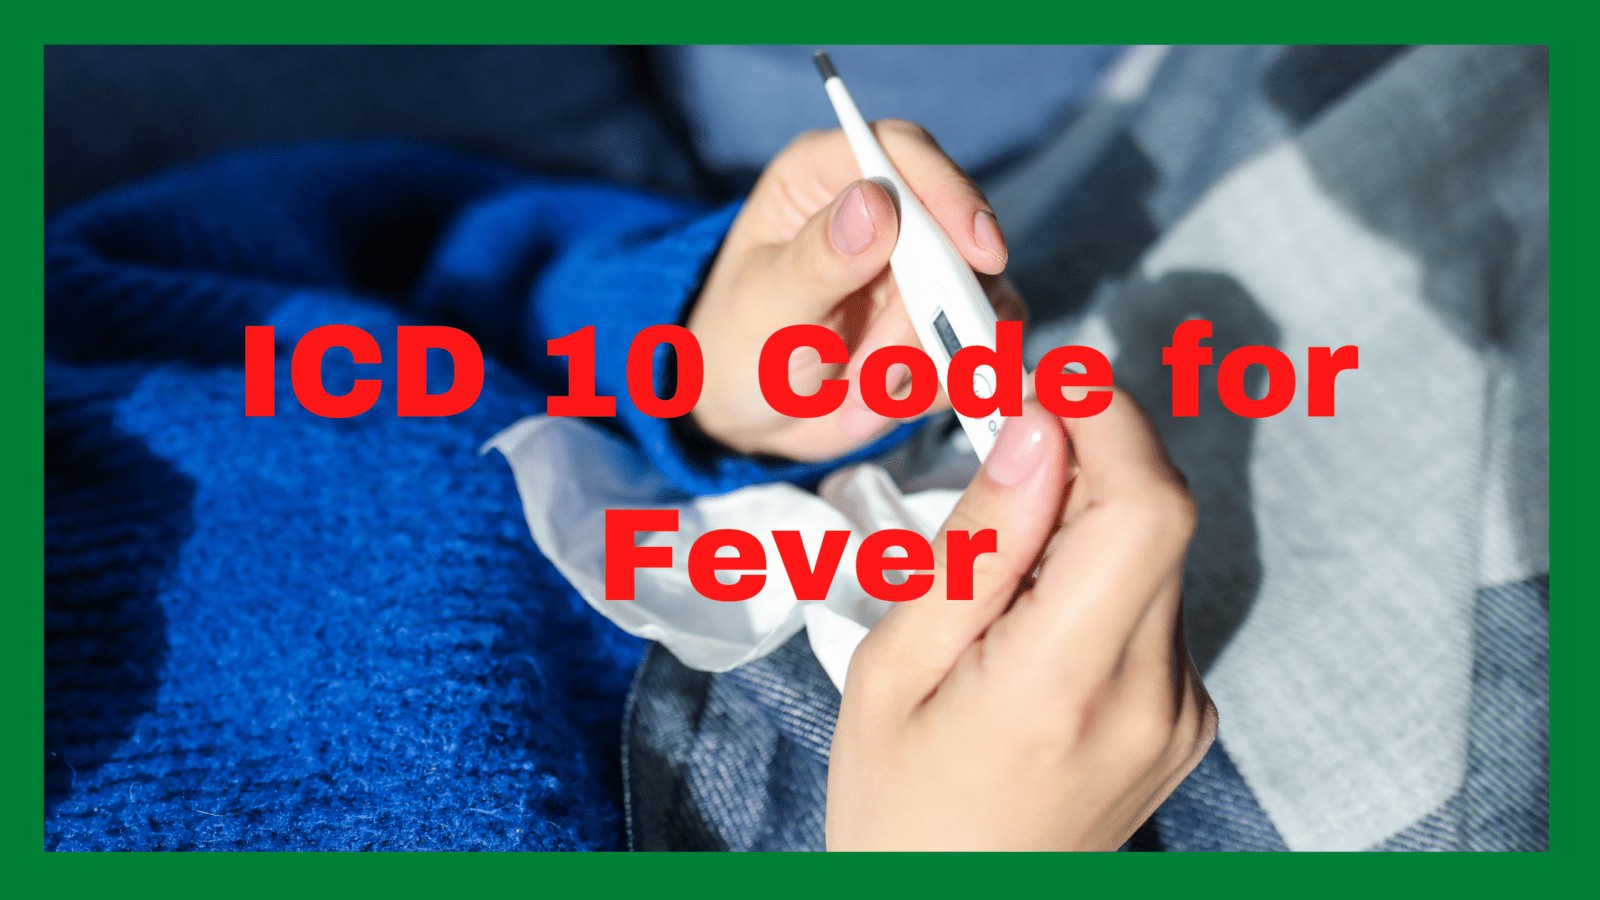 ICD 10 Code for fever is R50.9